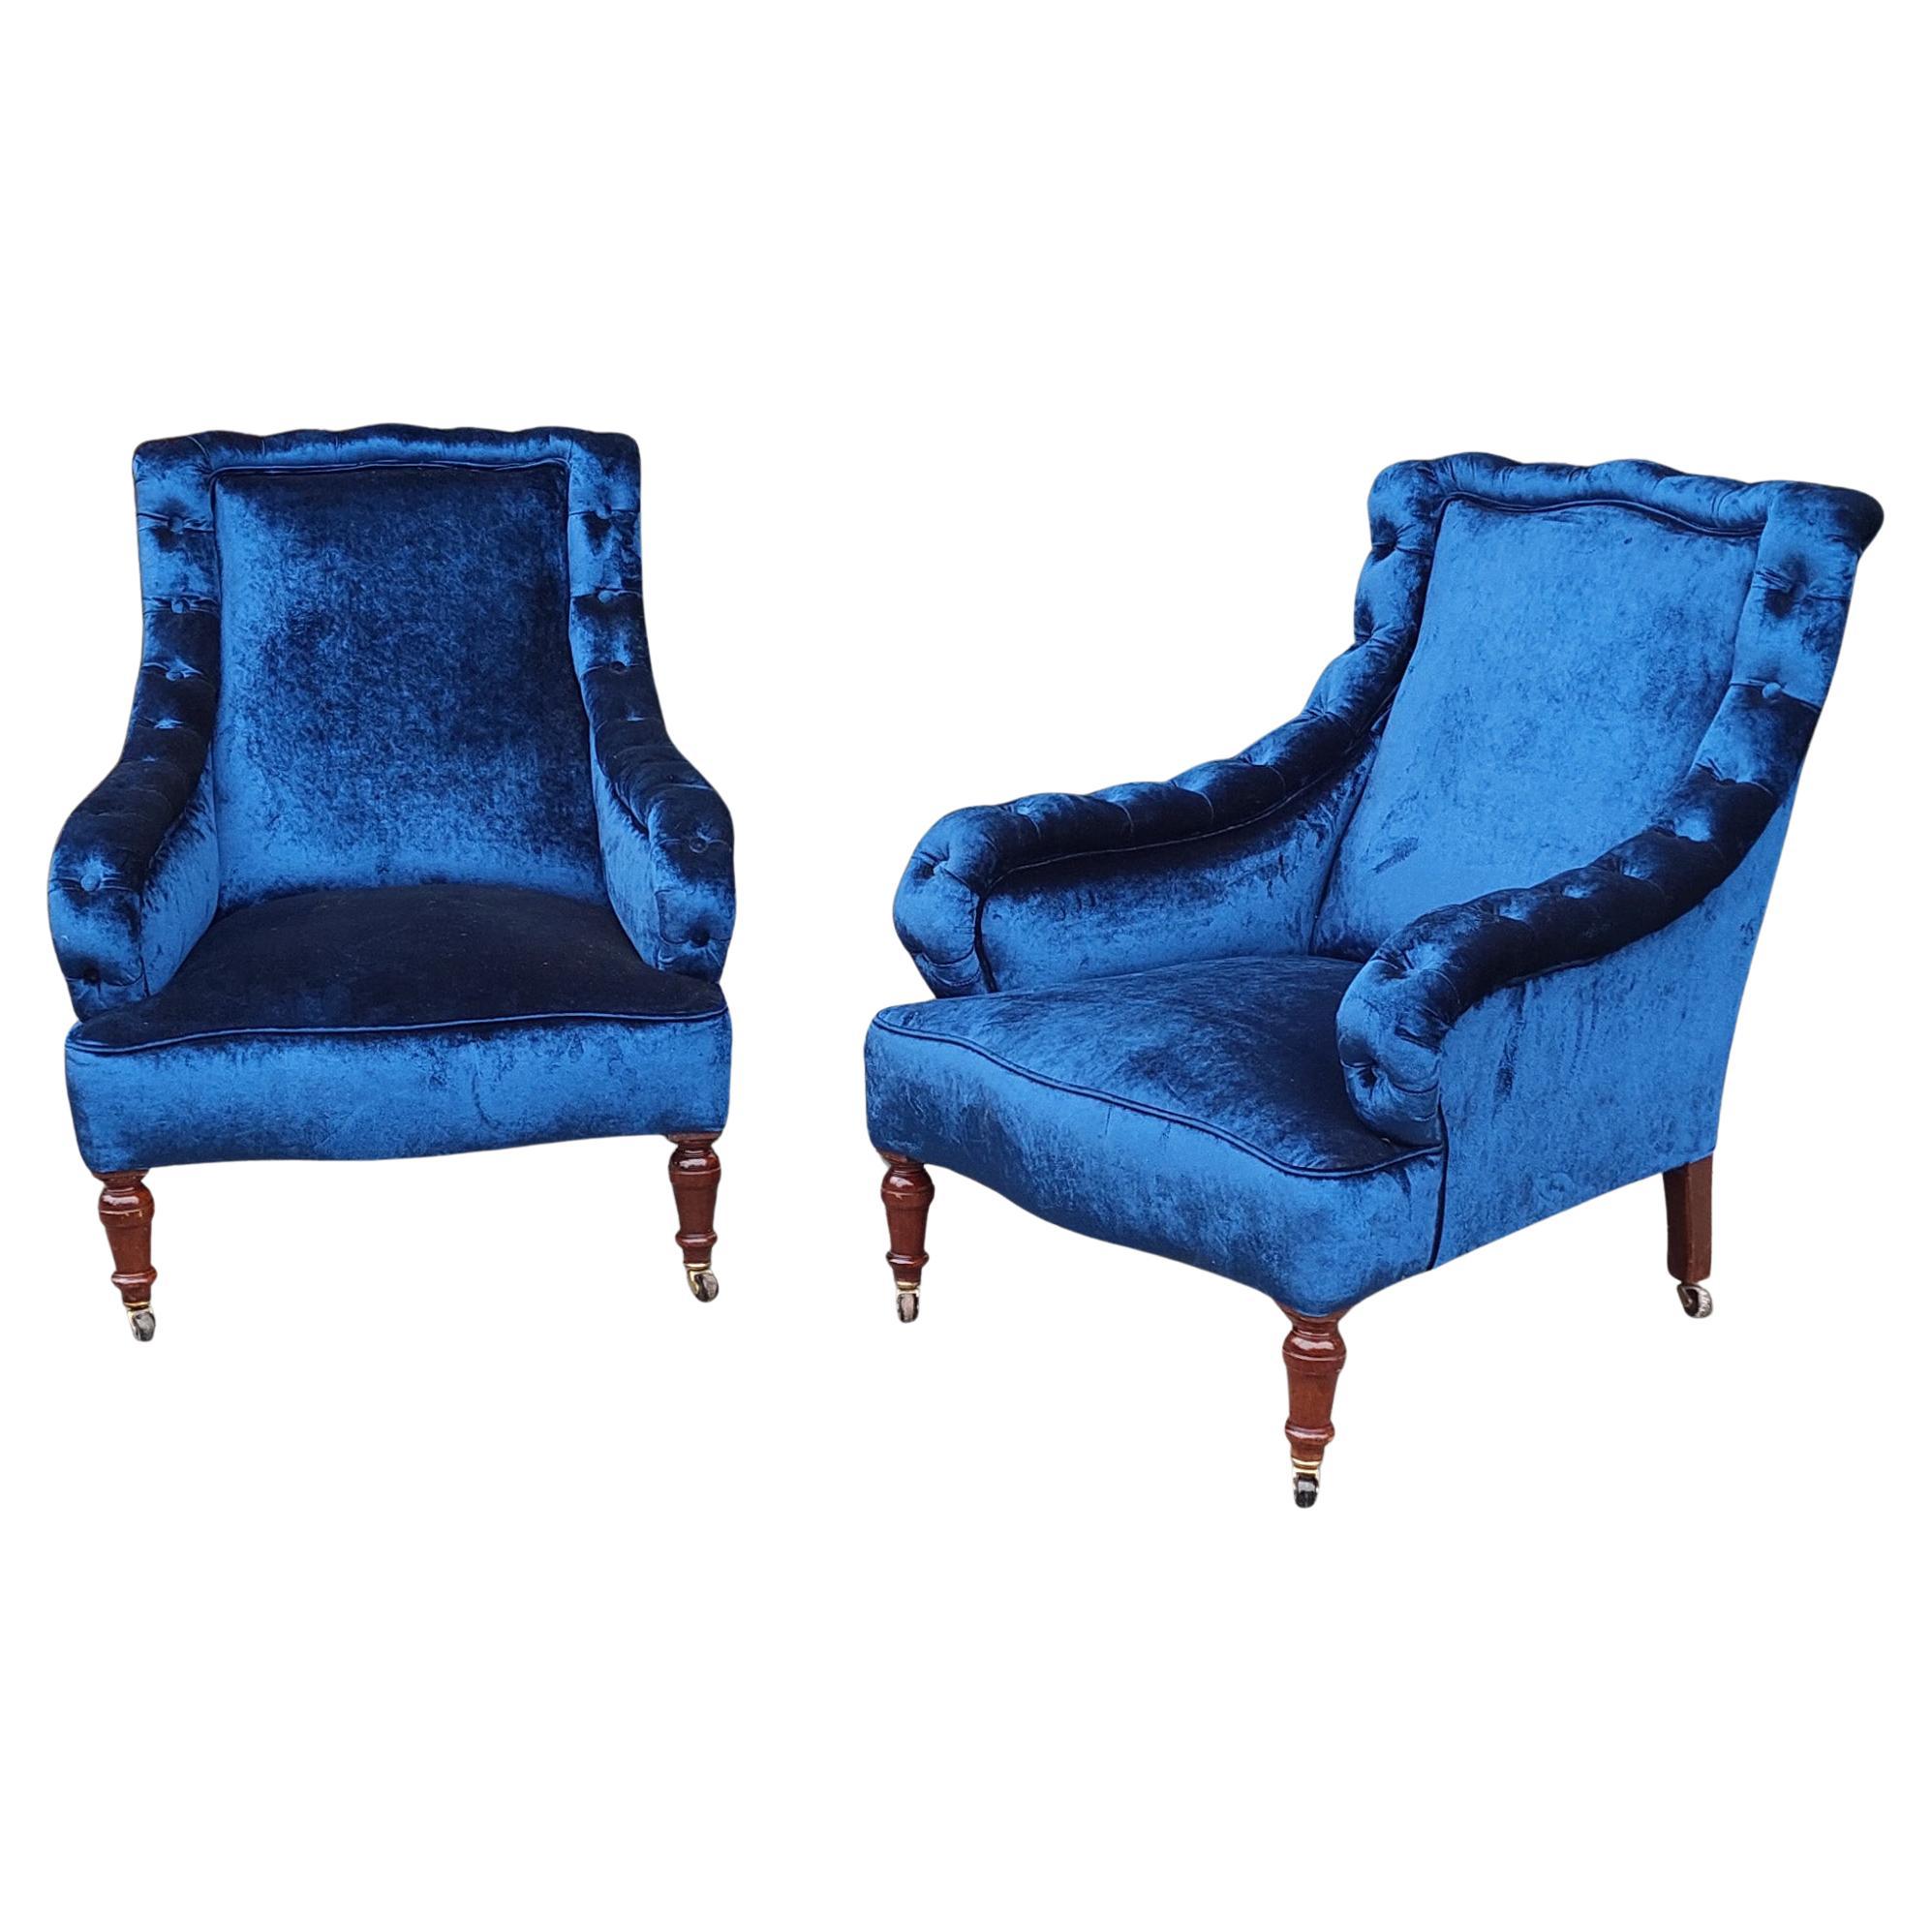 Pair of Victorian Upholstered Armchairs